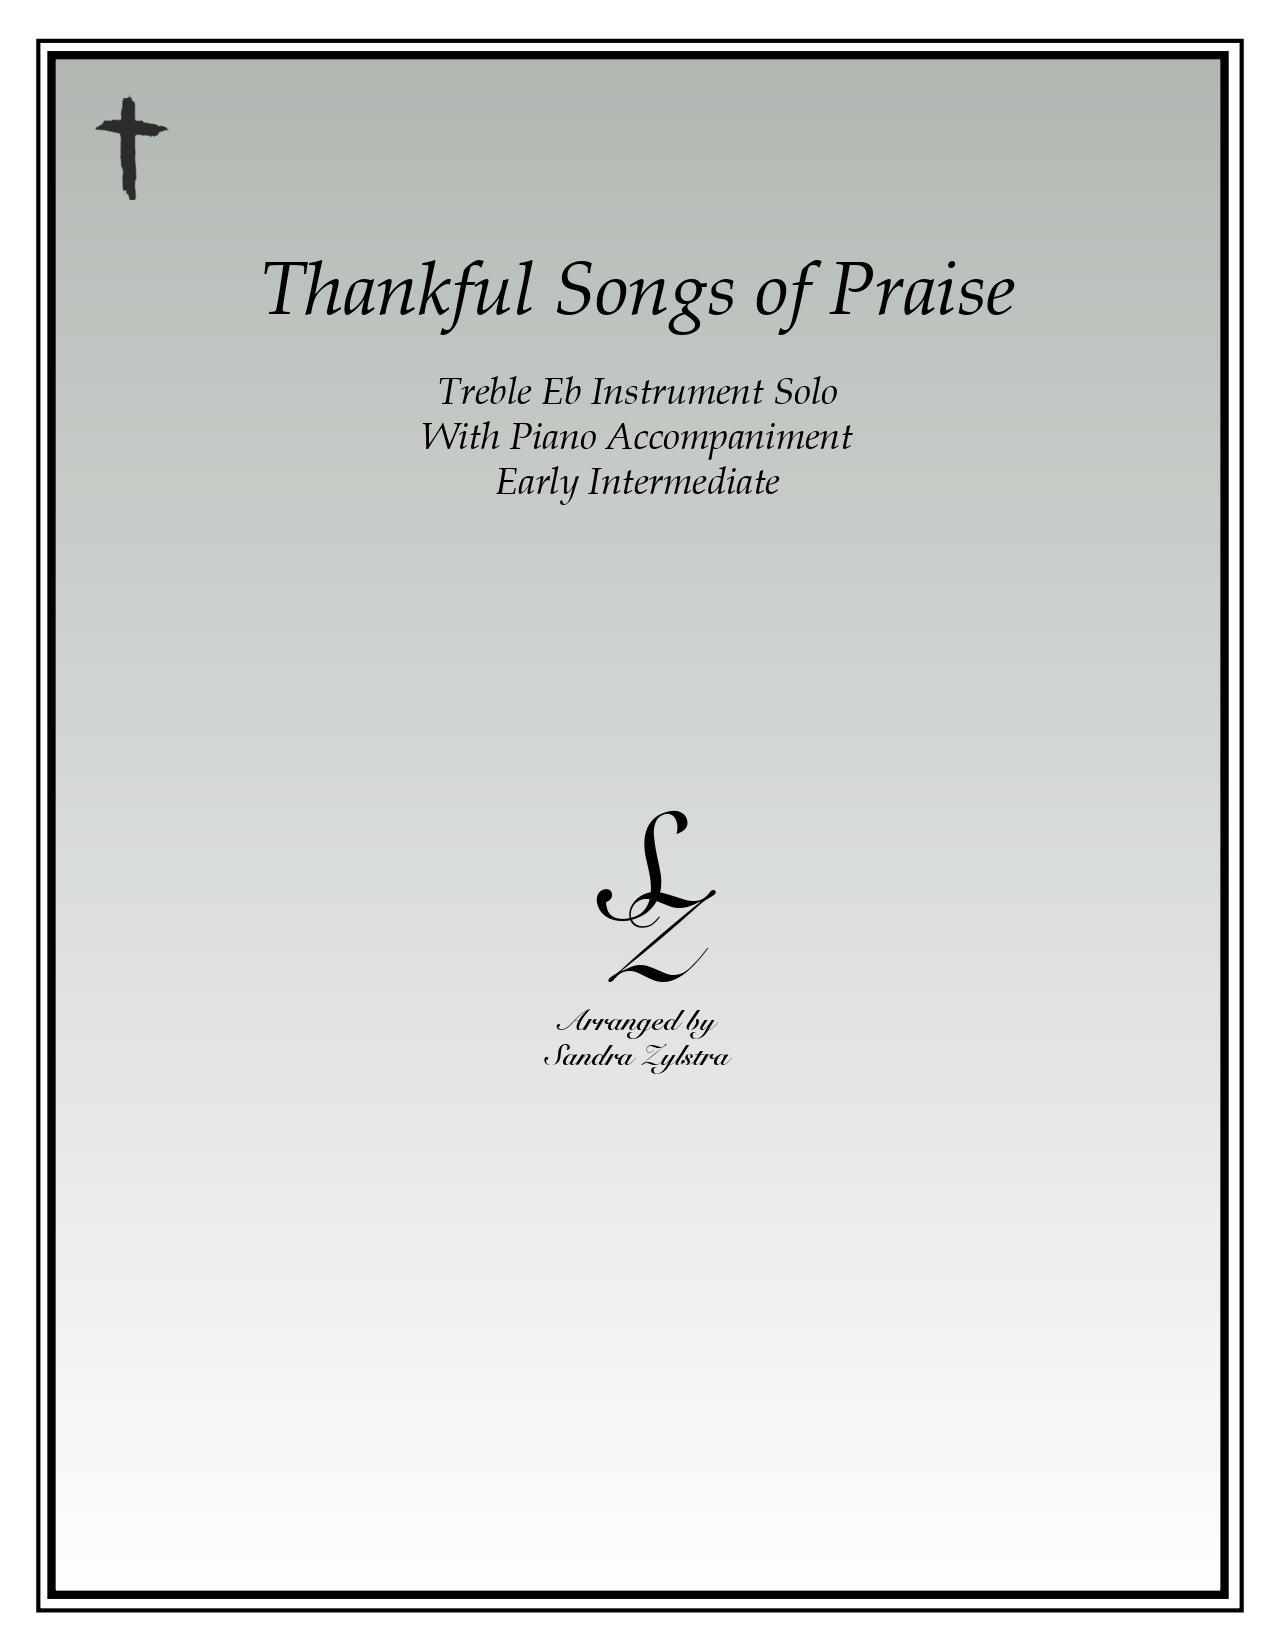 Thankful Songs Of Praise Eb instrument solo part cover page 00011